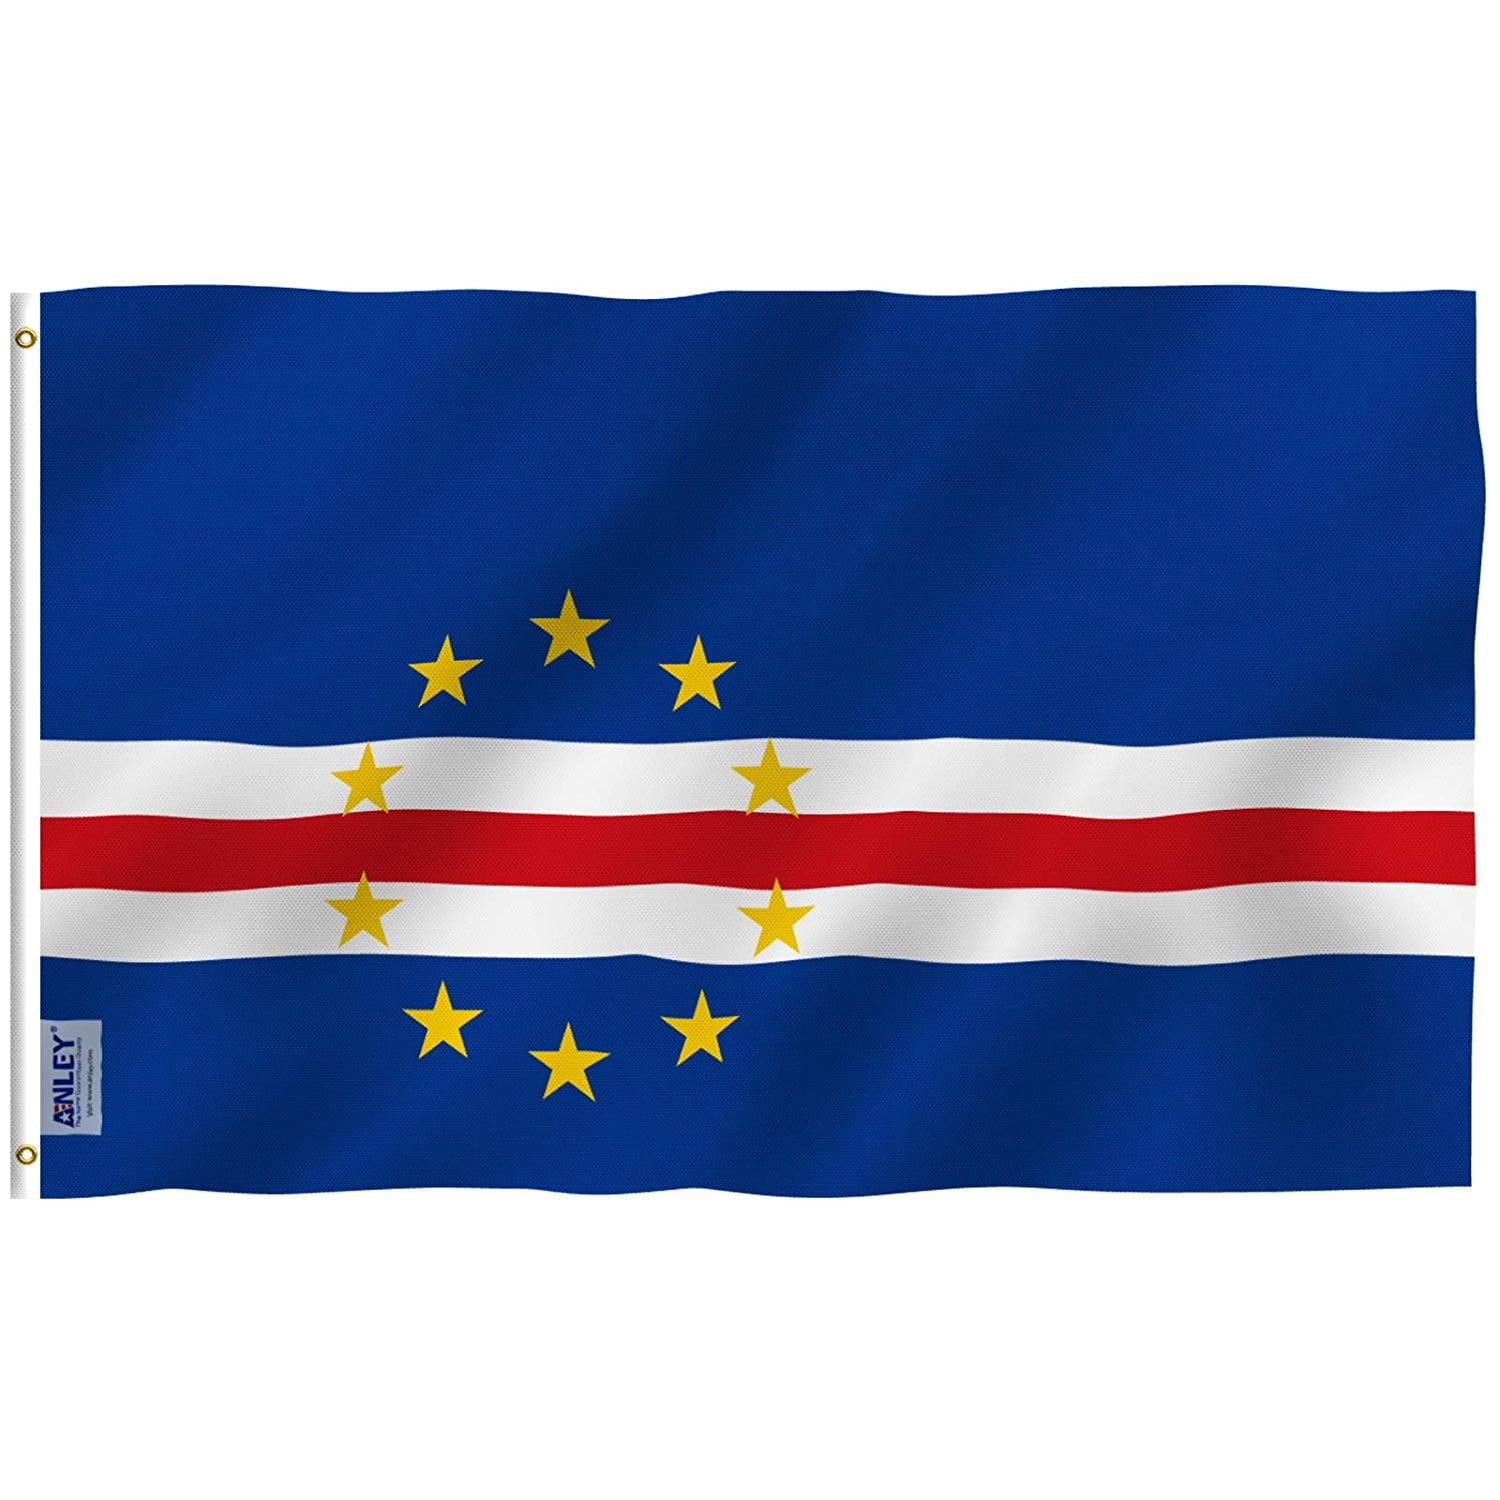 Anley 3x5 Feet Cape Verde Flag The Republic of Cape Verde Flags Polyester 